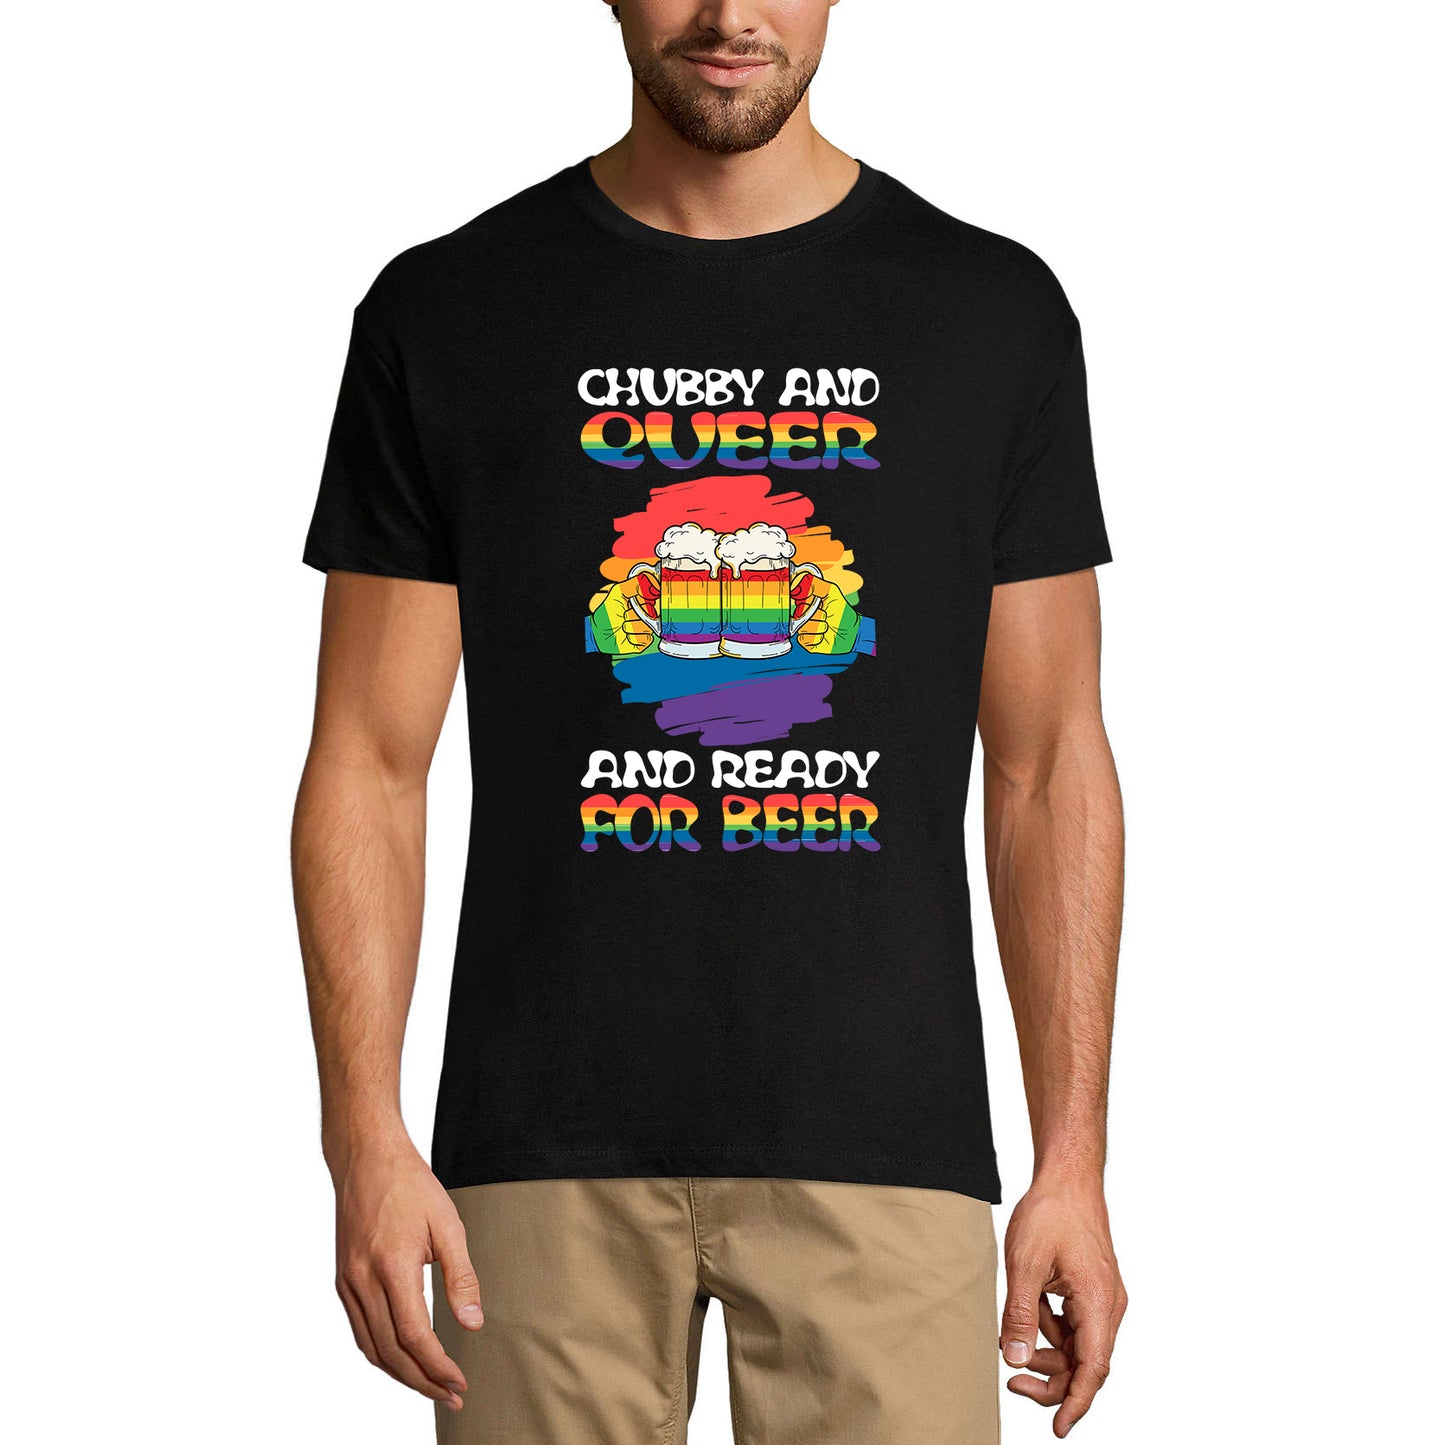 ULTRABASIC Men's Novelty T-Shirt Chubby and Queer and Ready for Beer - Funny Beer Tee Shirt